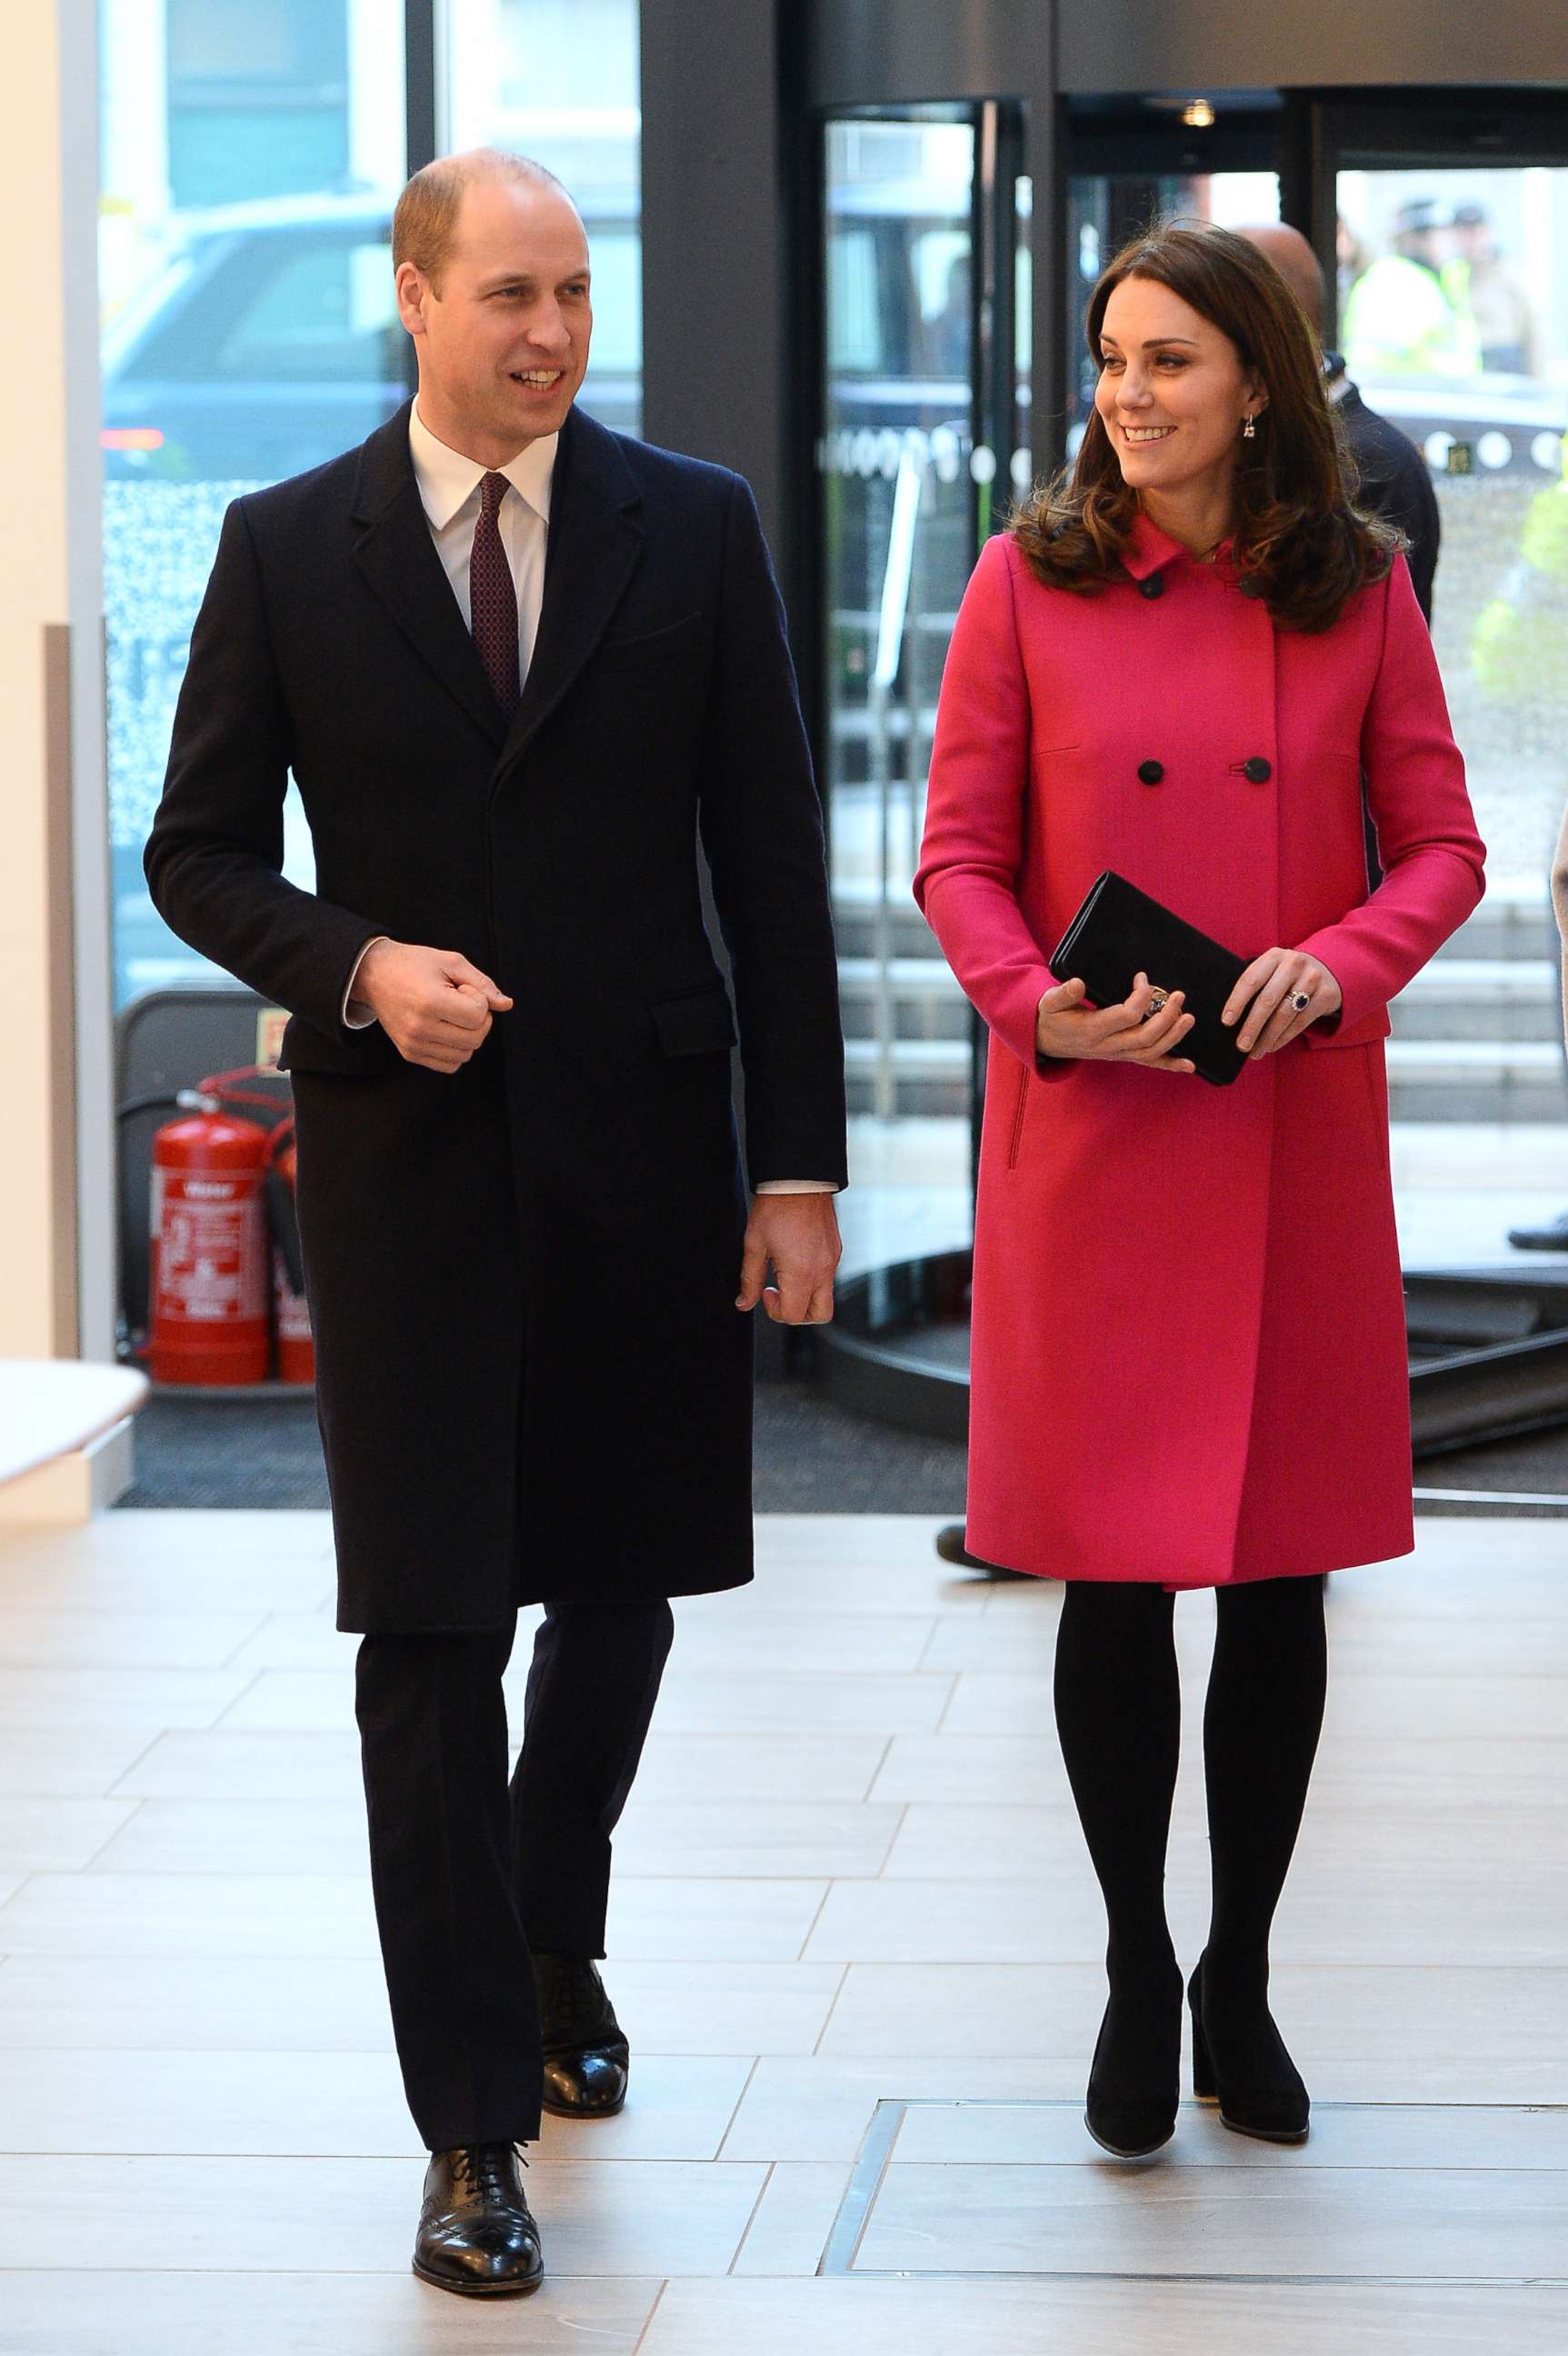 PHOTO: Prince William and Catherine Duchess of Cambridge visit Coventry in the UK, Jan. 16, 2018.